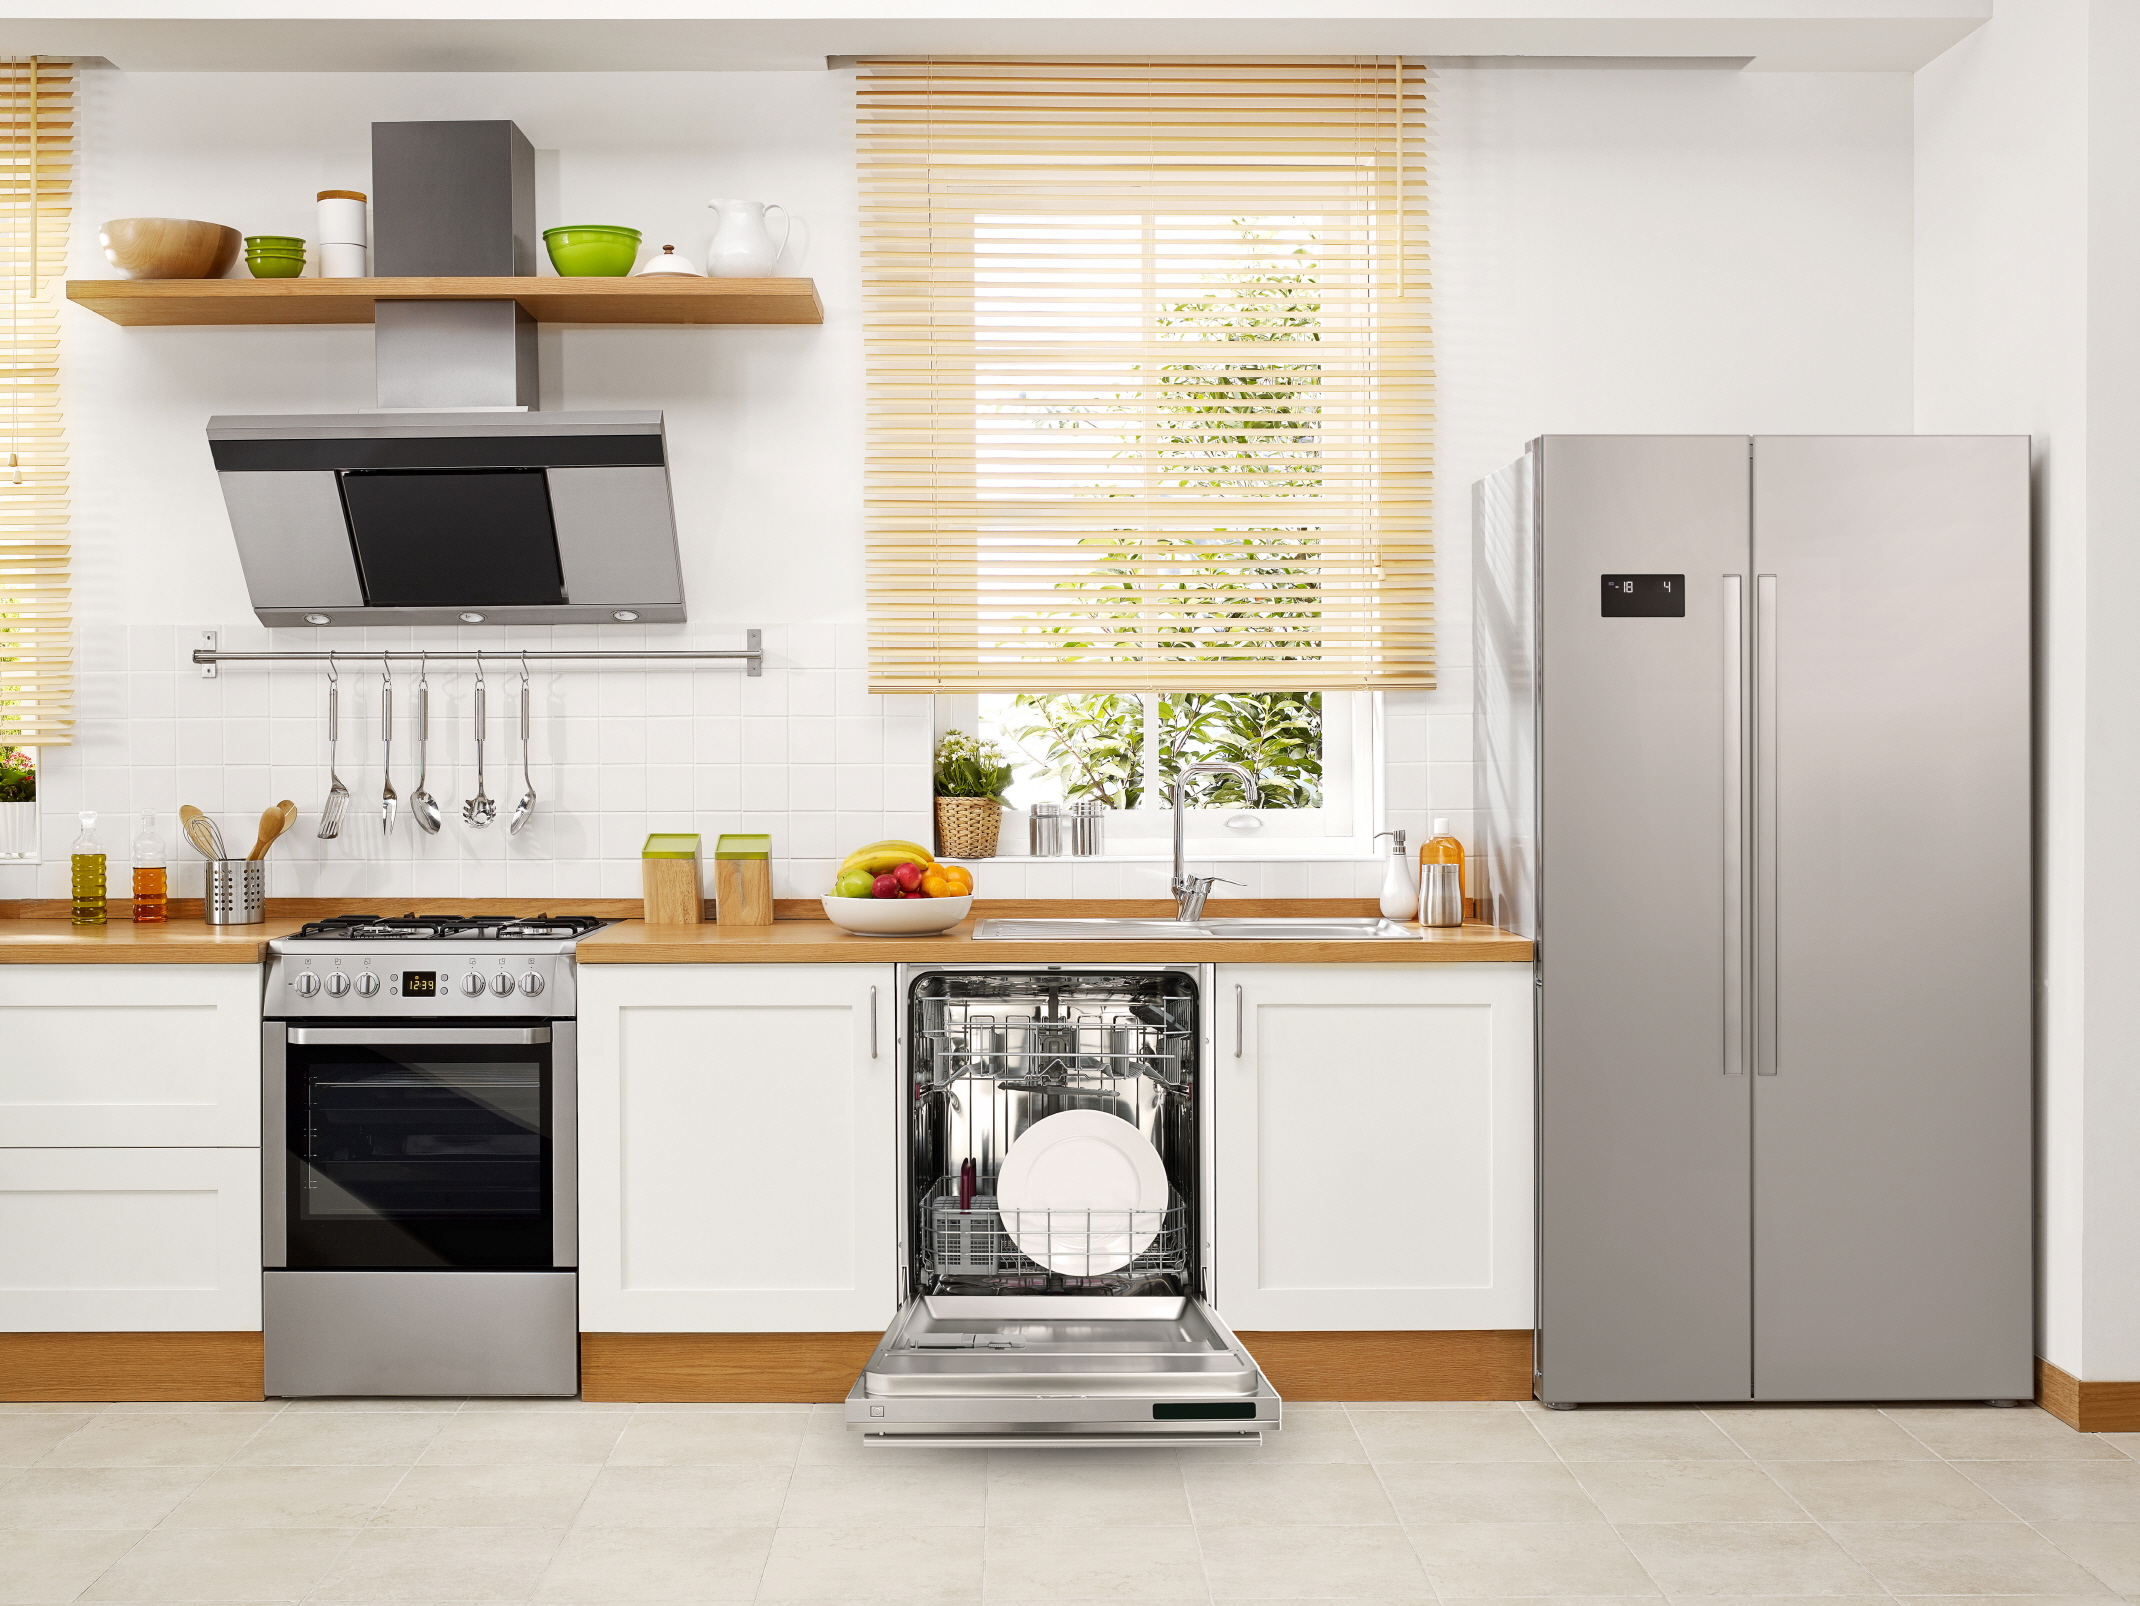 Camouflage your dishwasher in a budget kitchen, seamlessly blending it into your aesthetic while keeping costs low.